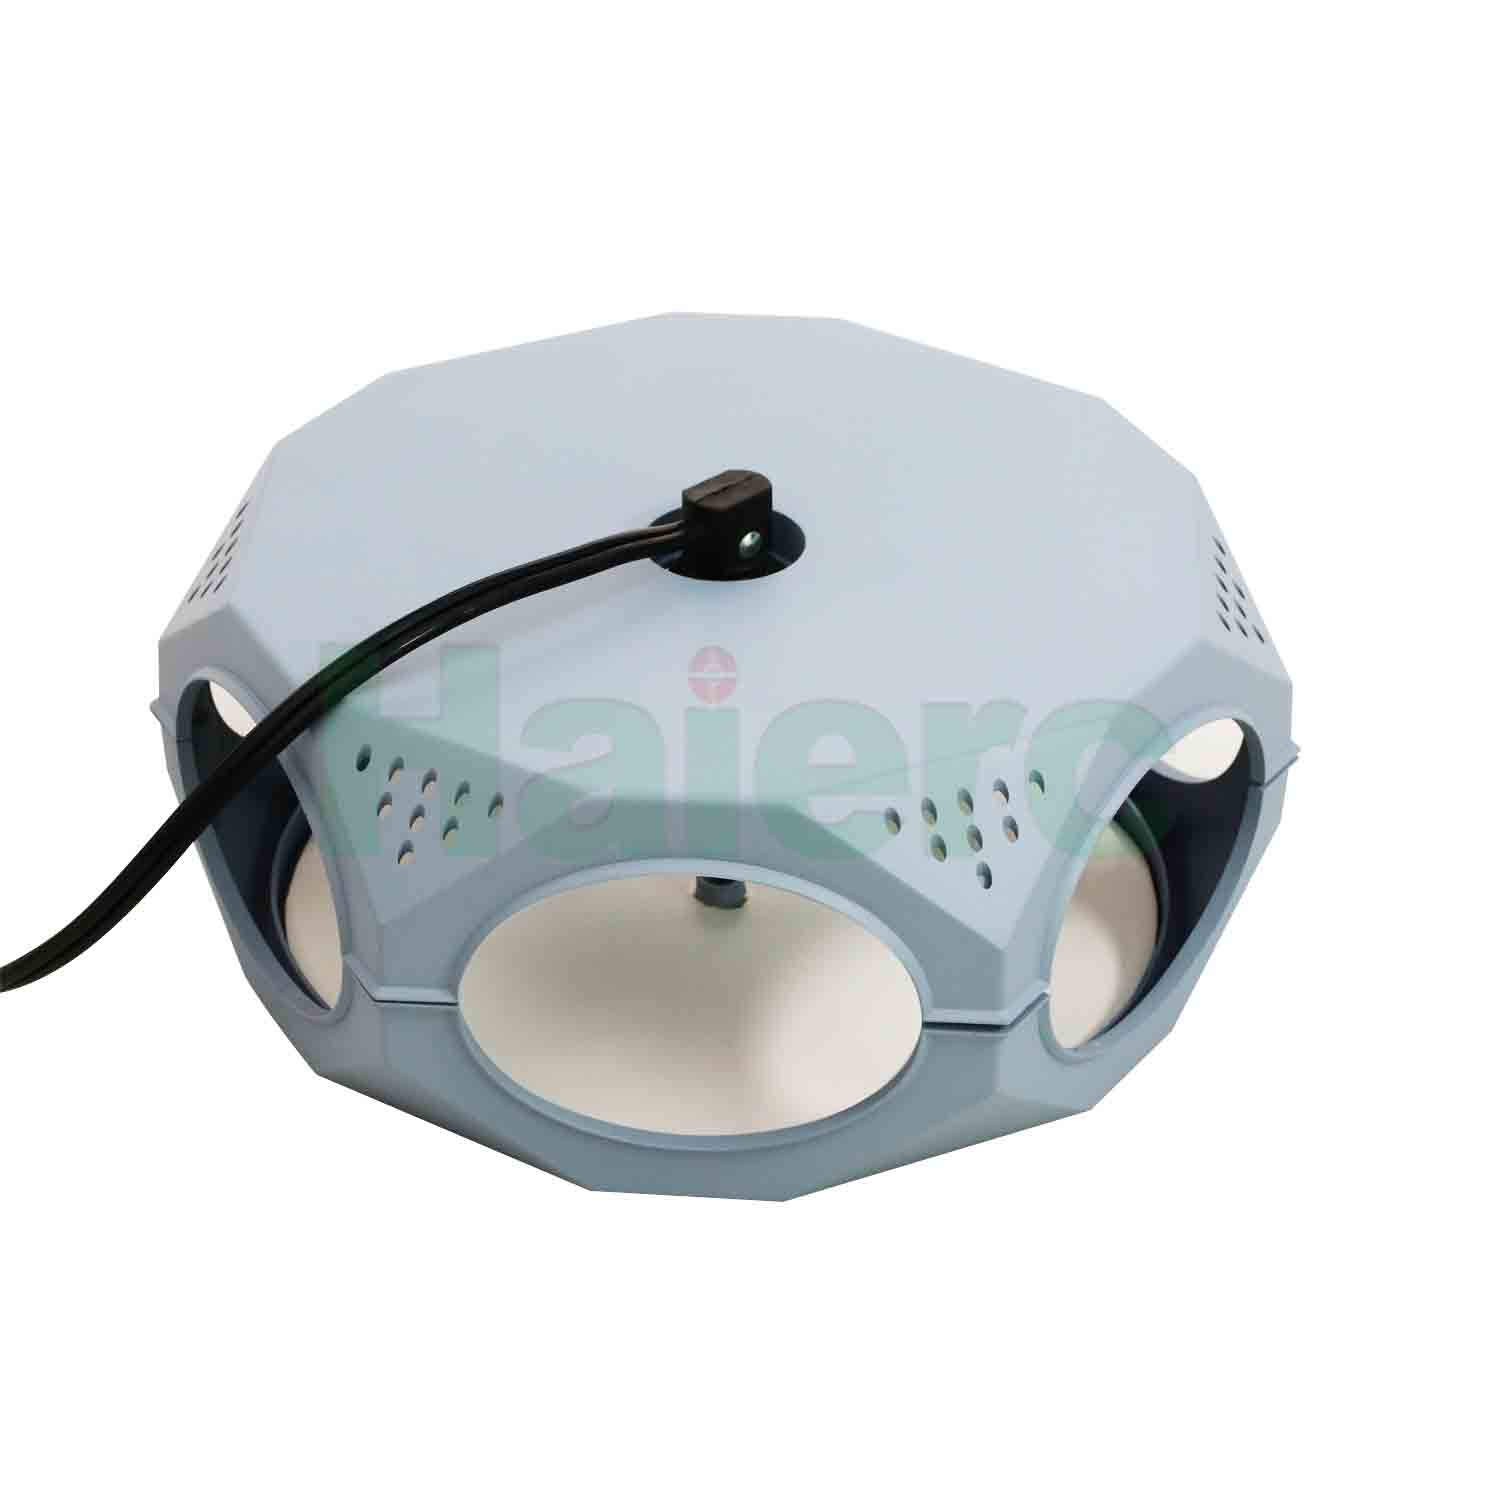 Haierc indoor insect control flea trap lamp and bed bug trap lamp HC4615